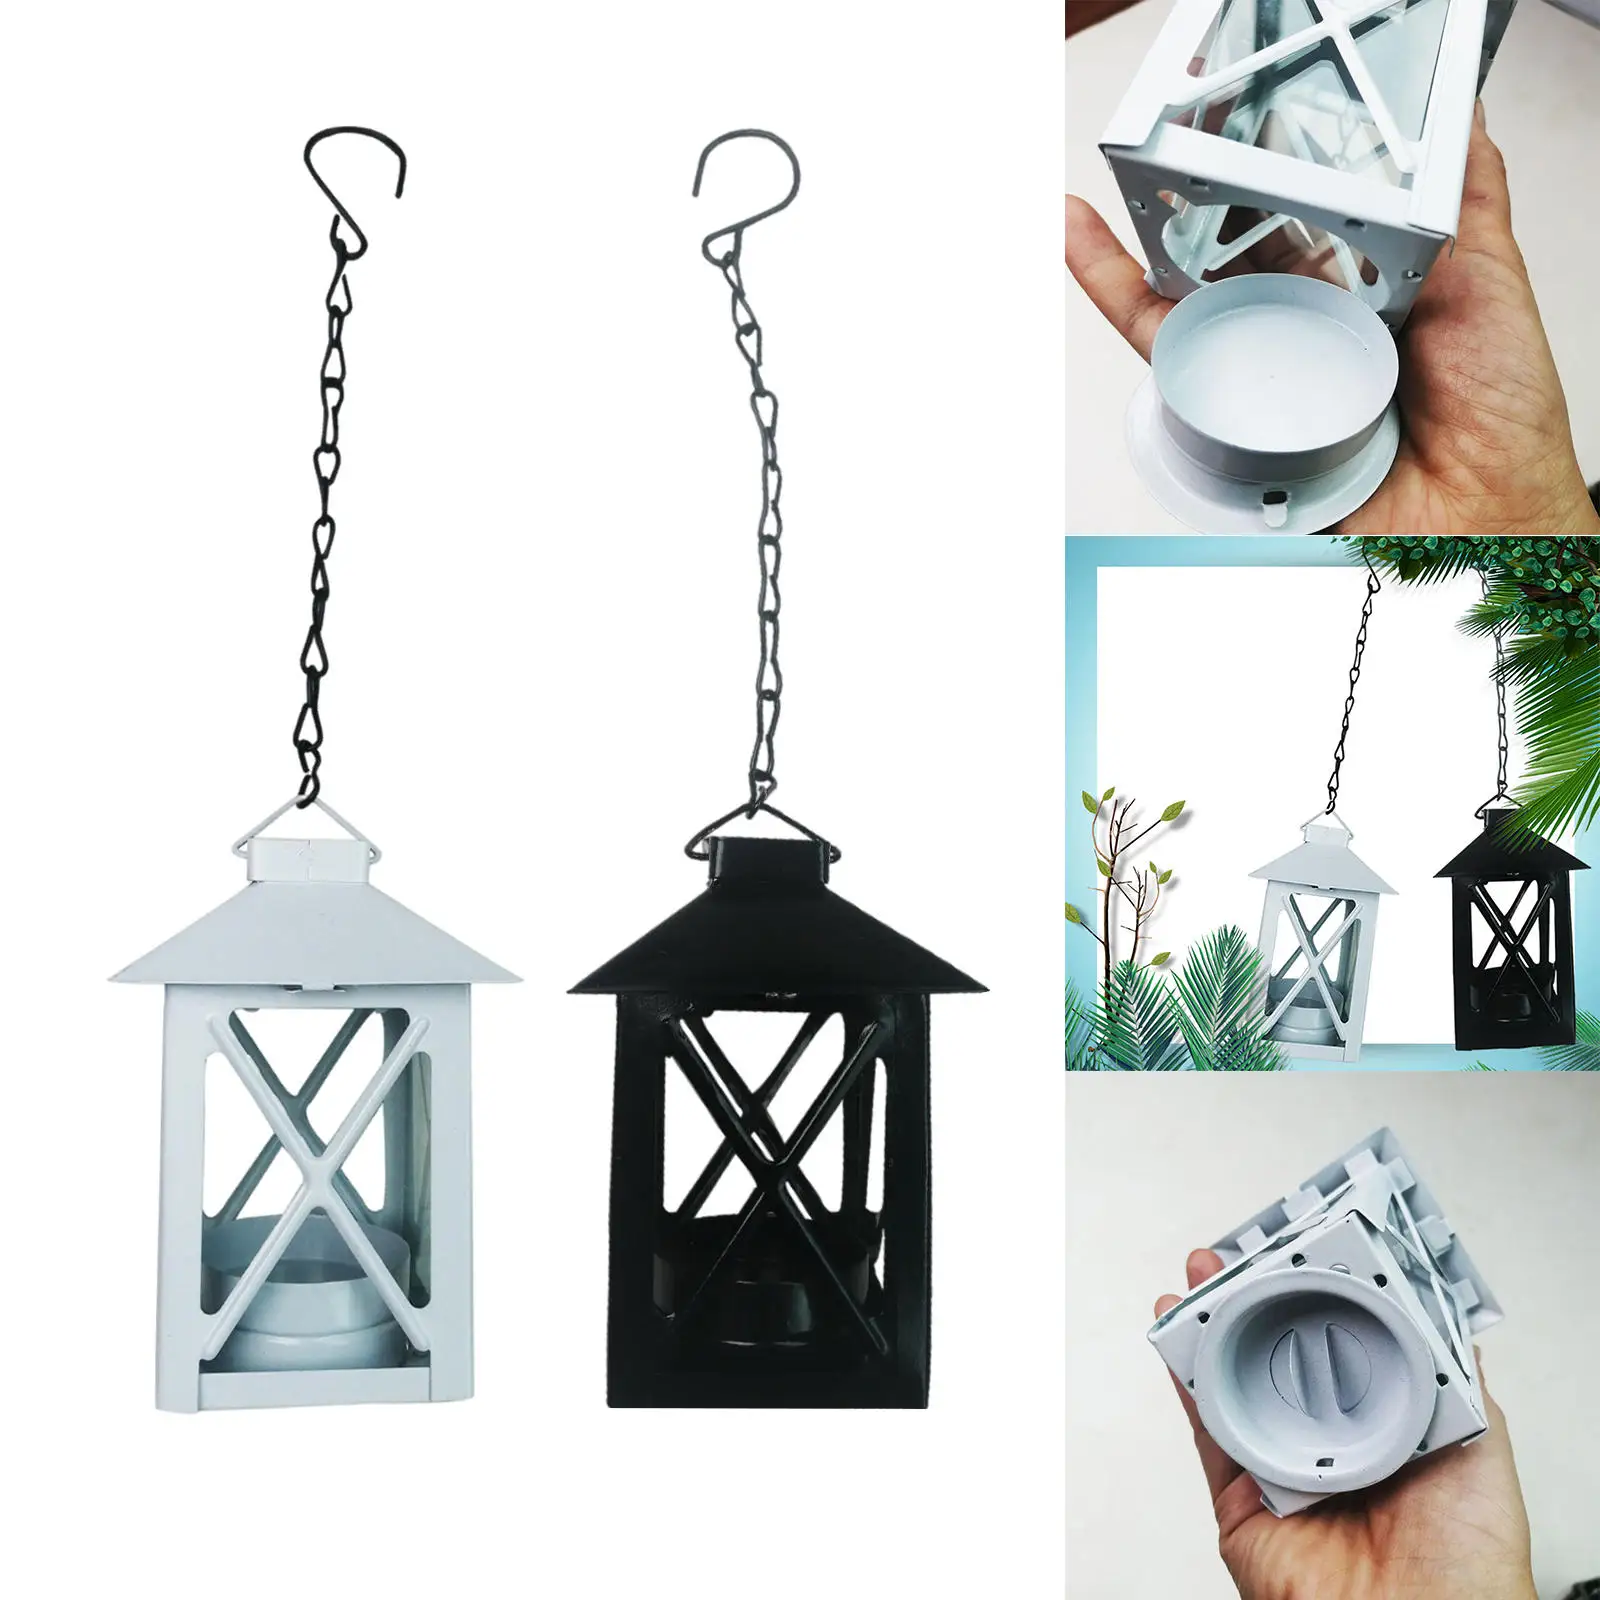 Retro Decorative Candle Lantern Hanging Tea Light Holder Rust-Proof for Votive Candle Indoor Outdoor Wedding Events Holiday